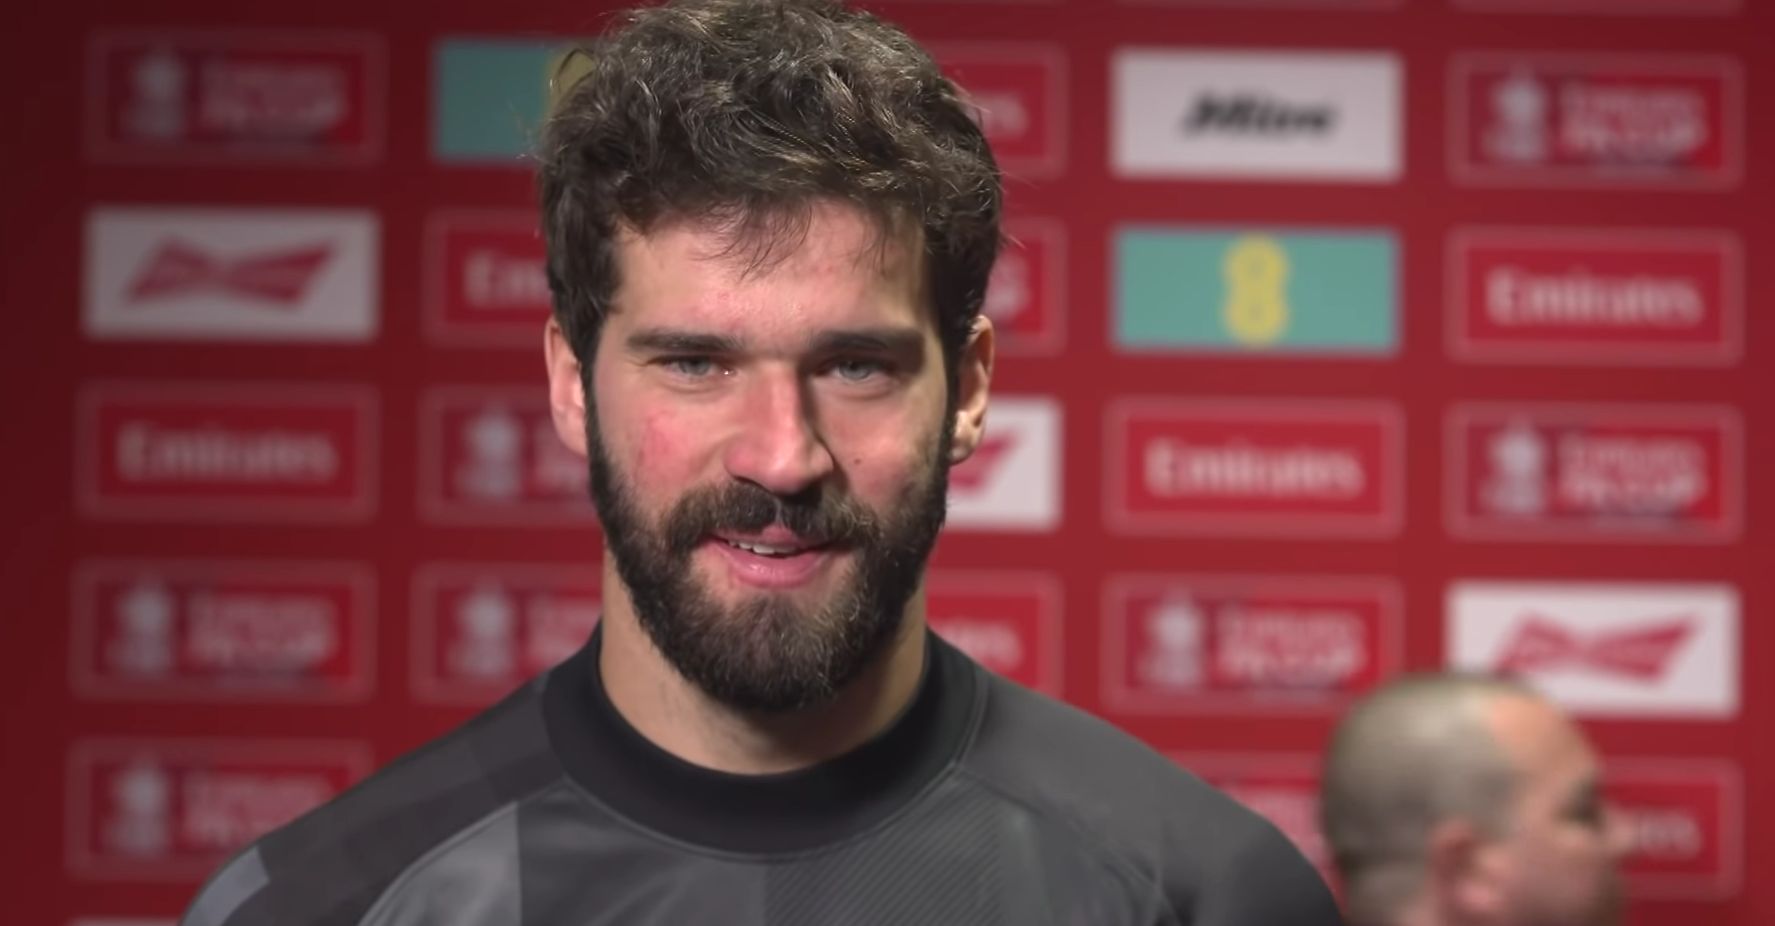 (Video) Alisson Becker on “winning, winning, winning all the time and winning all the trophies we have in front of us”